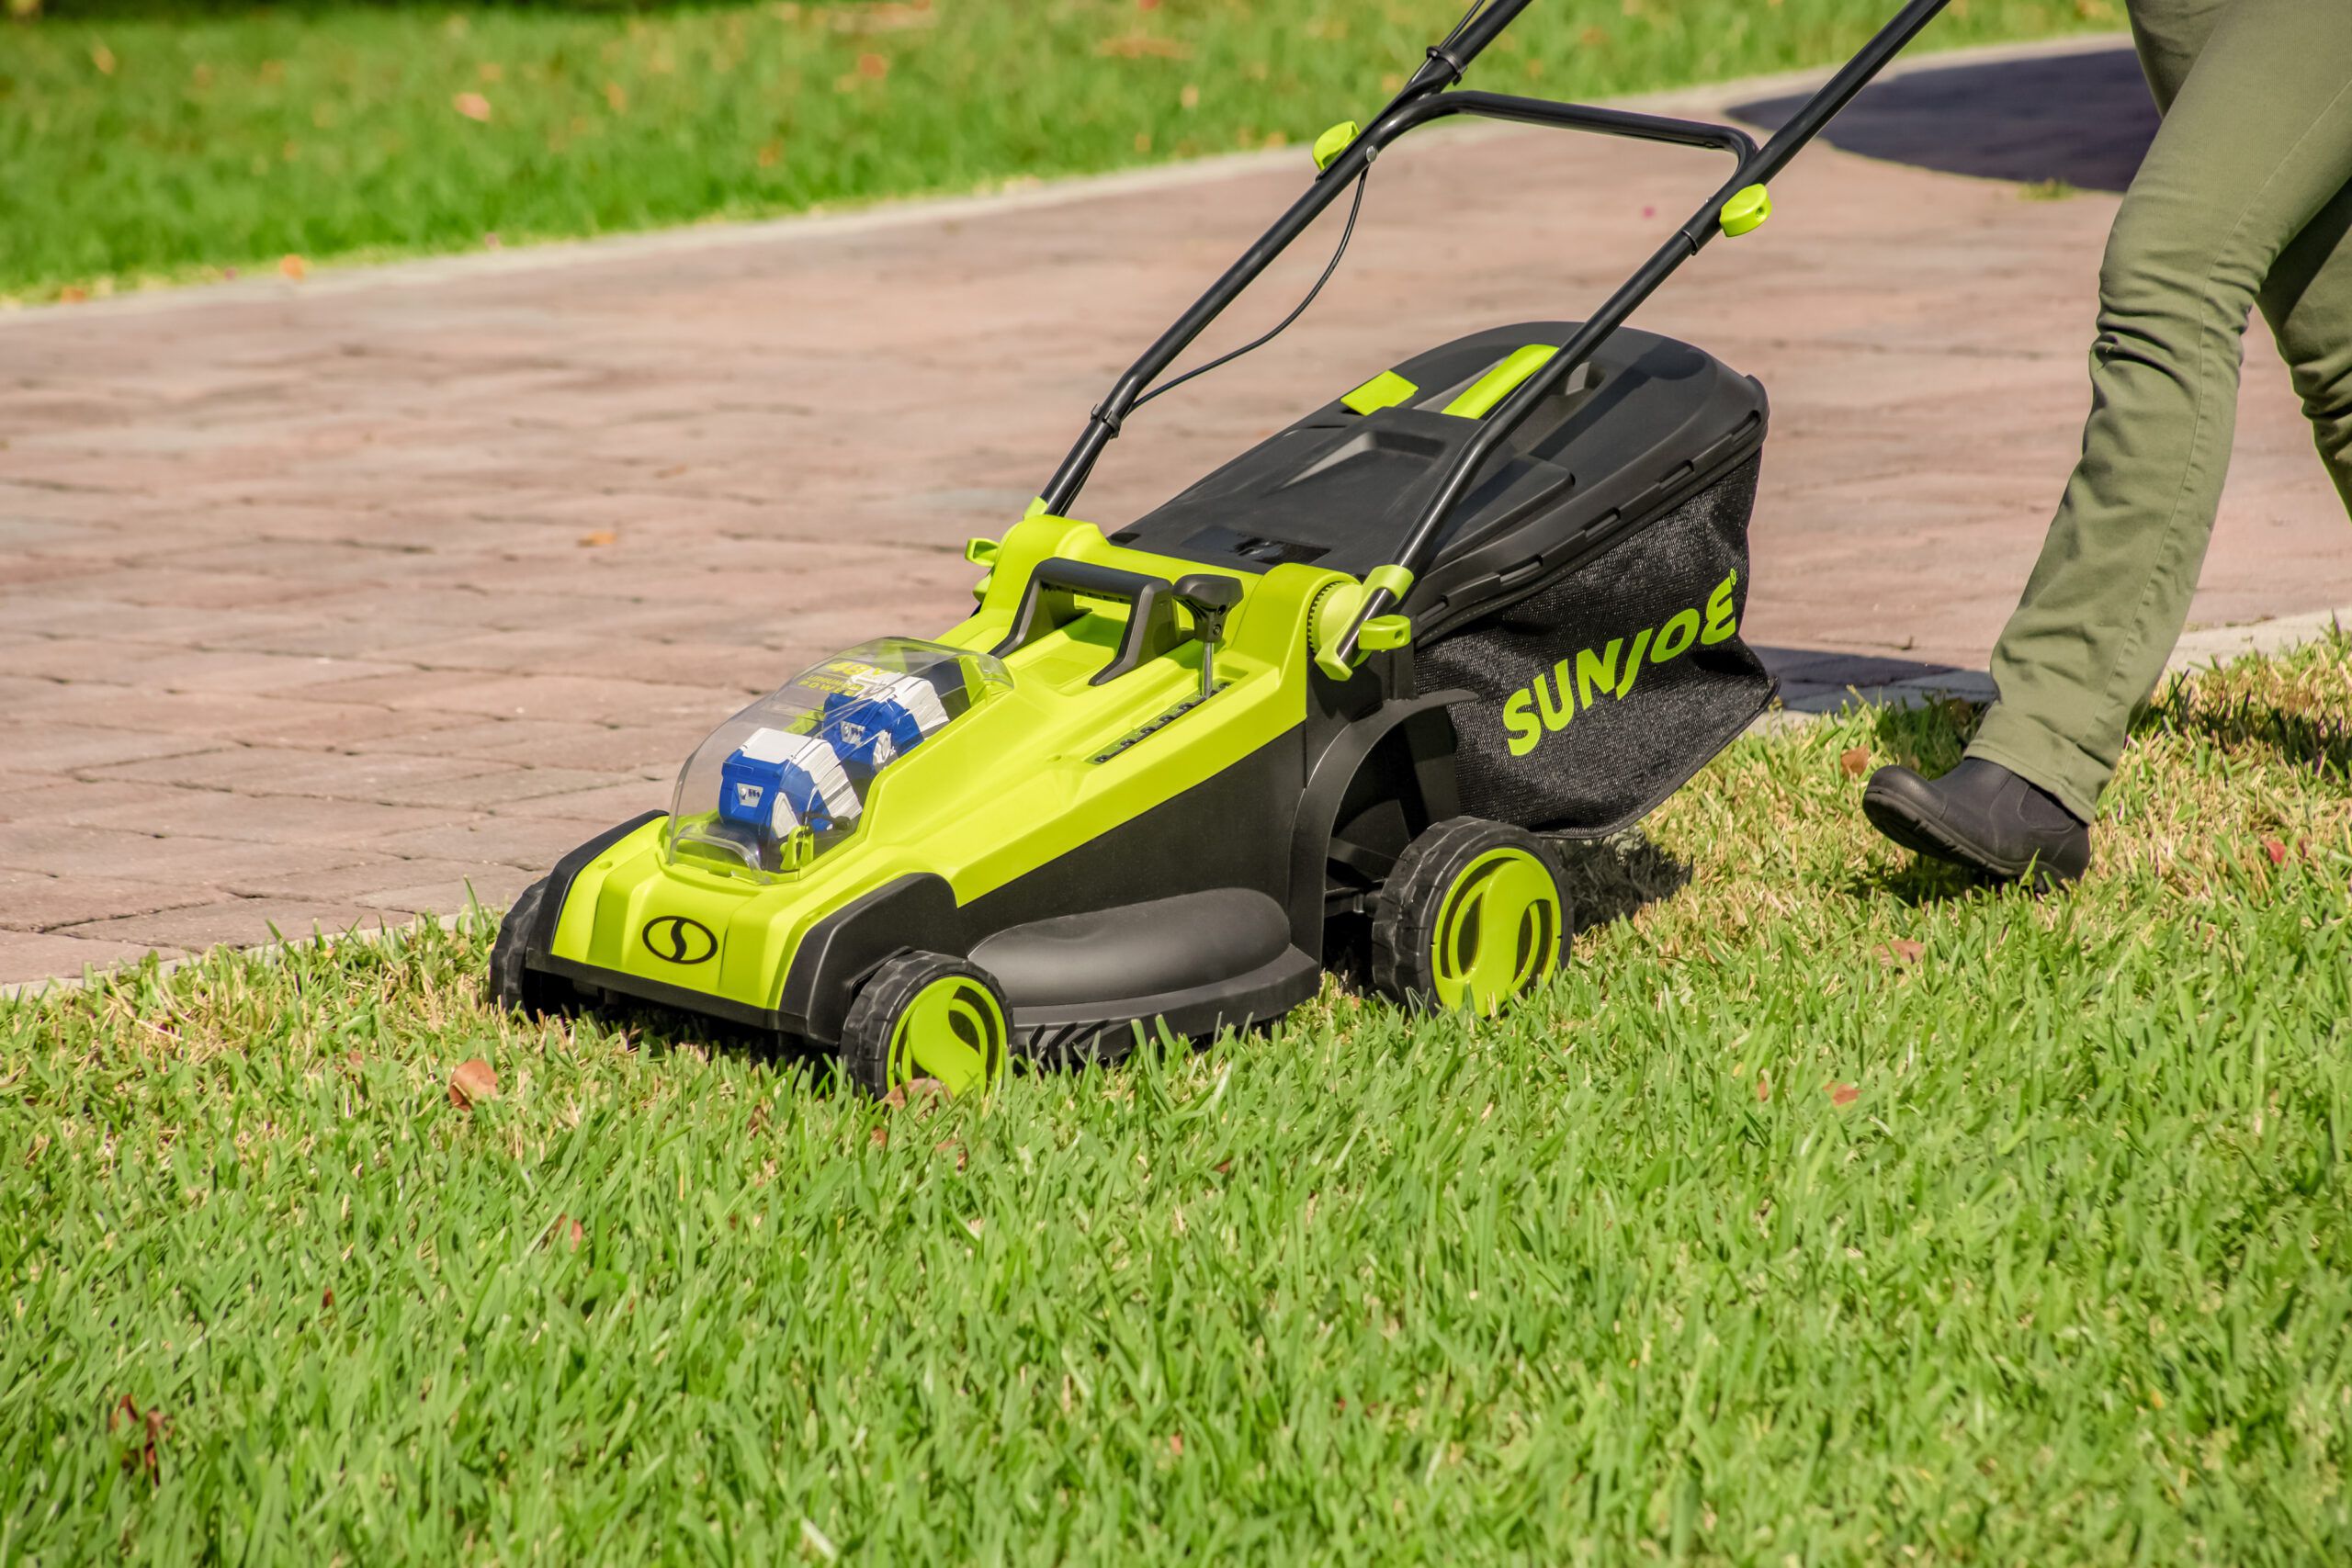 What to Look for When Buying a Cordless Lawn Mower